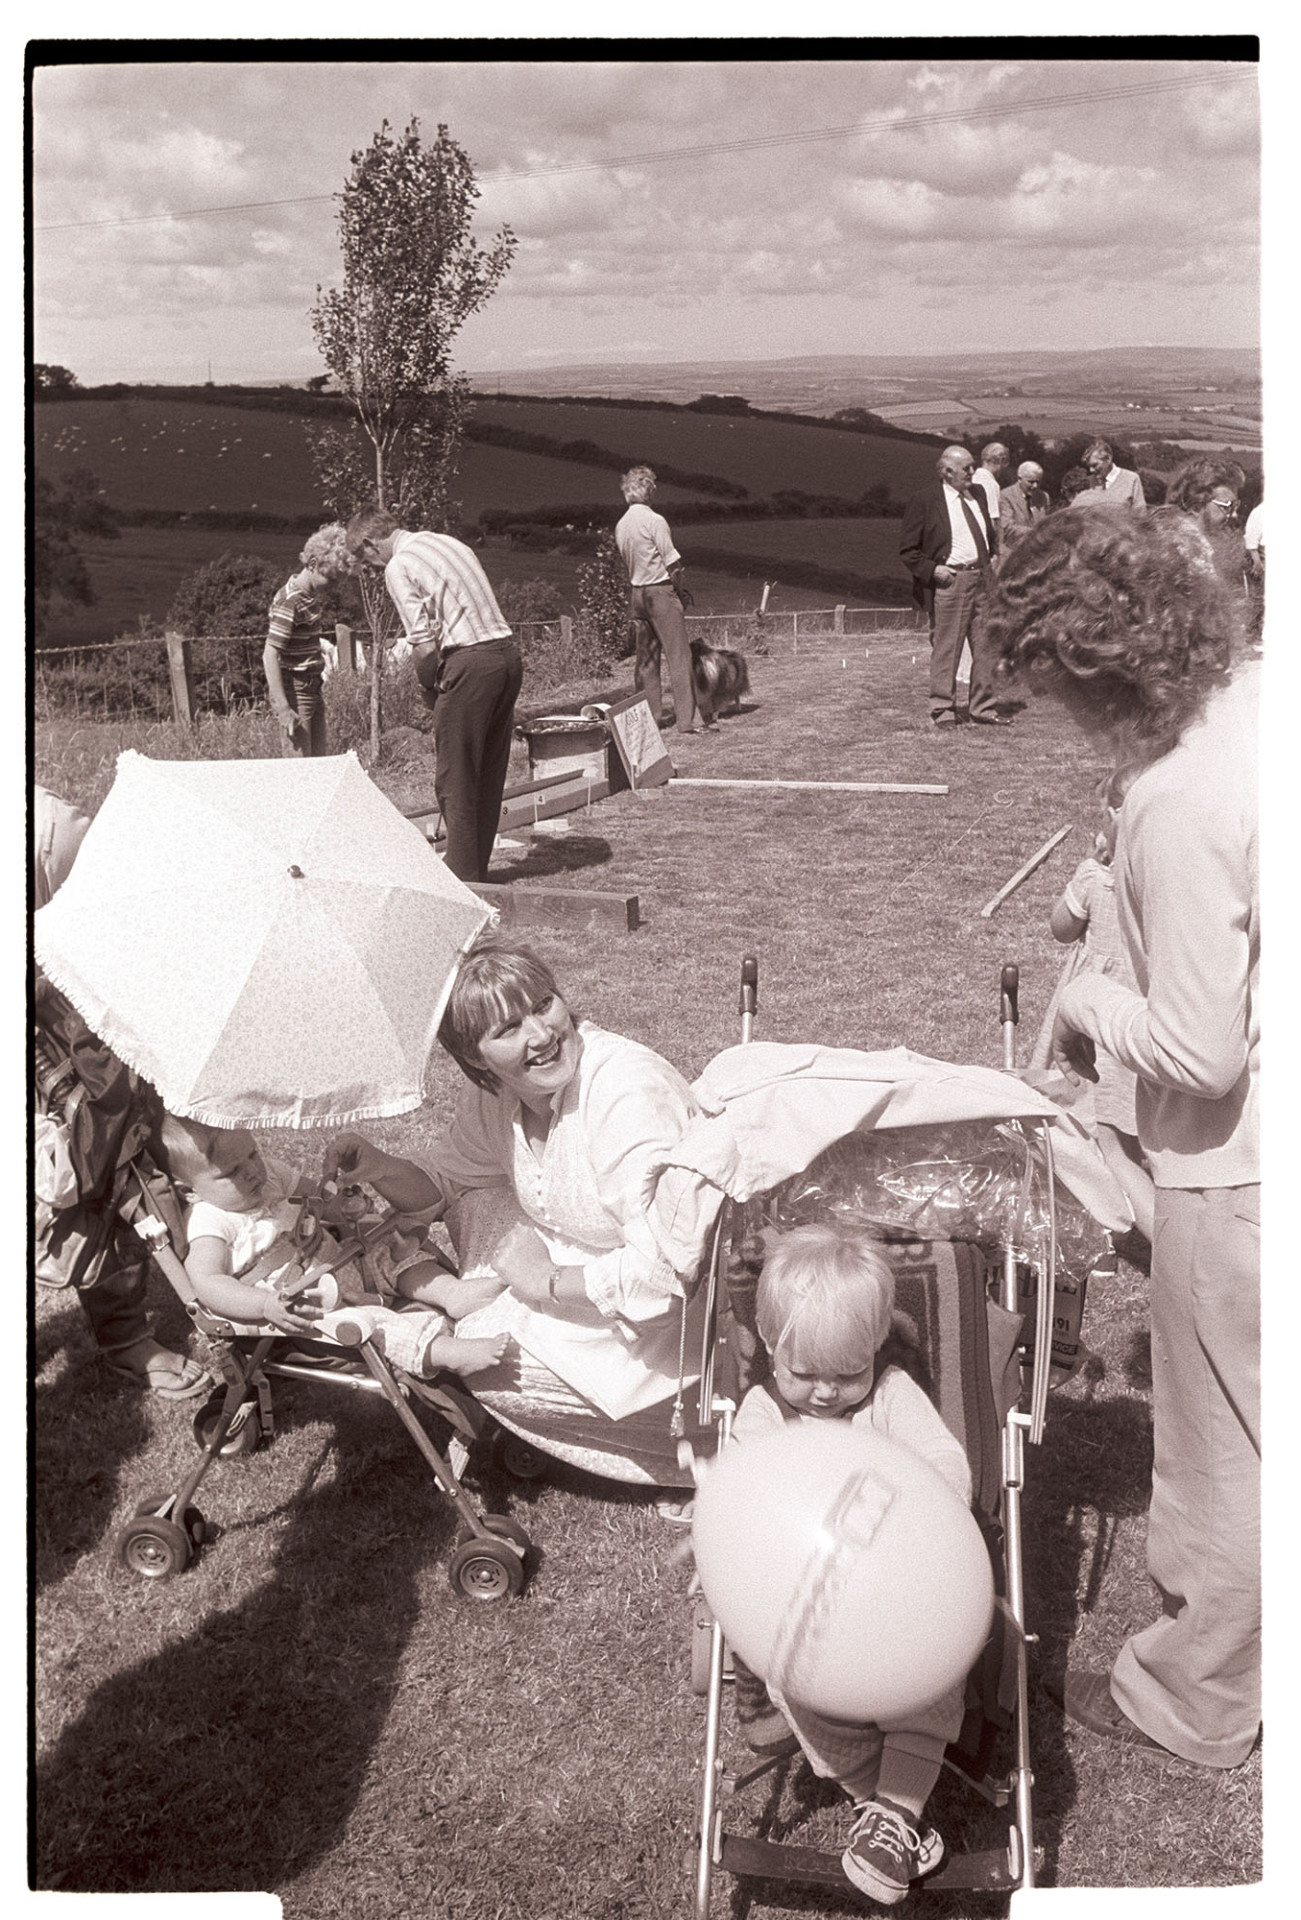 Mothers, women and children at fete, pushchairs, balloons. Babies. <br />
[Two mothers with their children in pushchairs at High Bickington Church Fete at the Rectory. A putting game is visible in the background.]